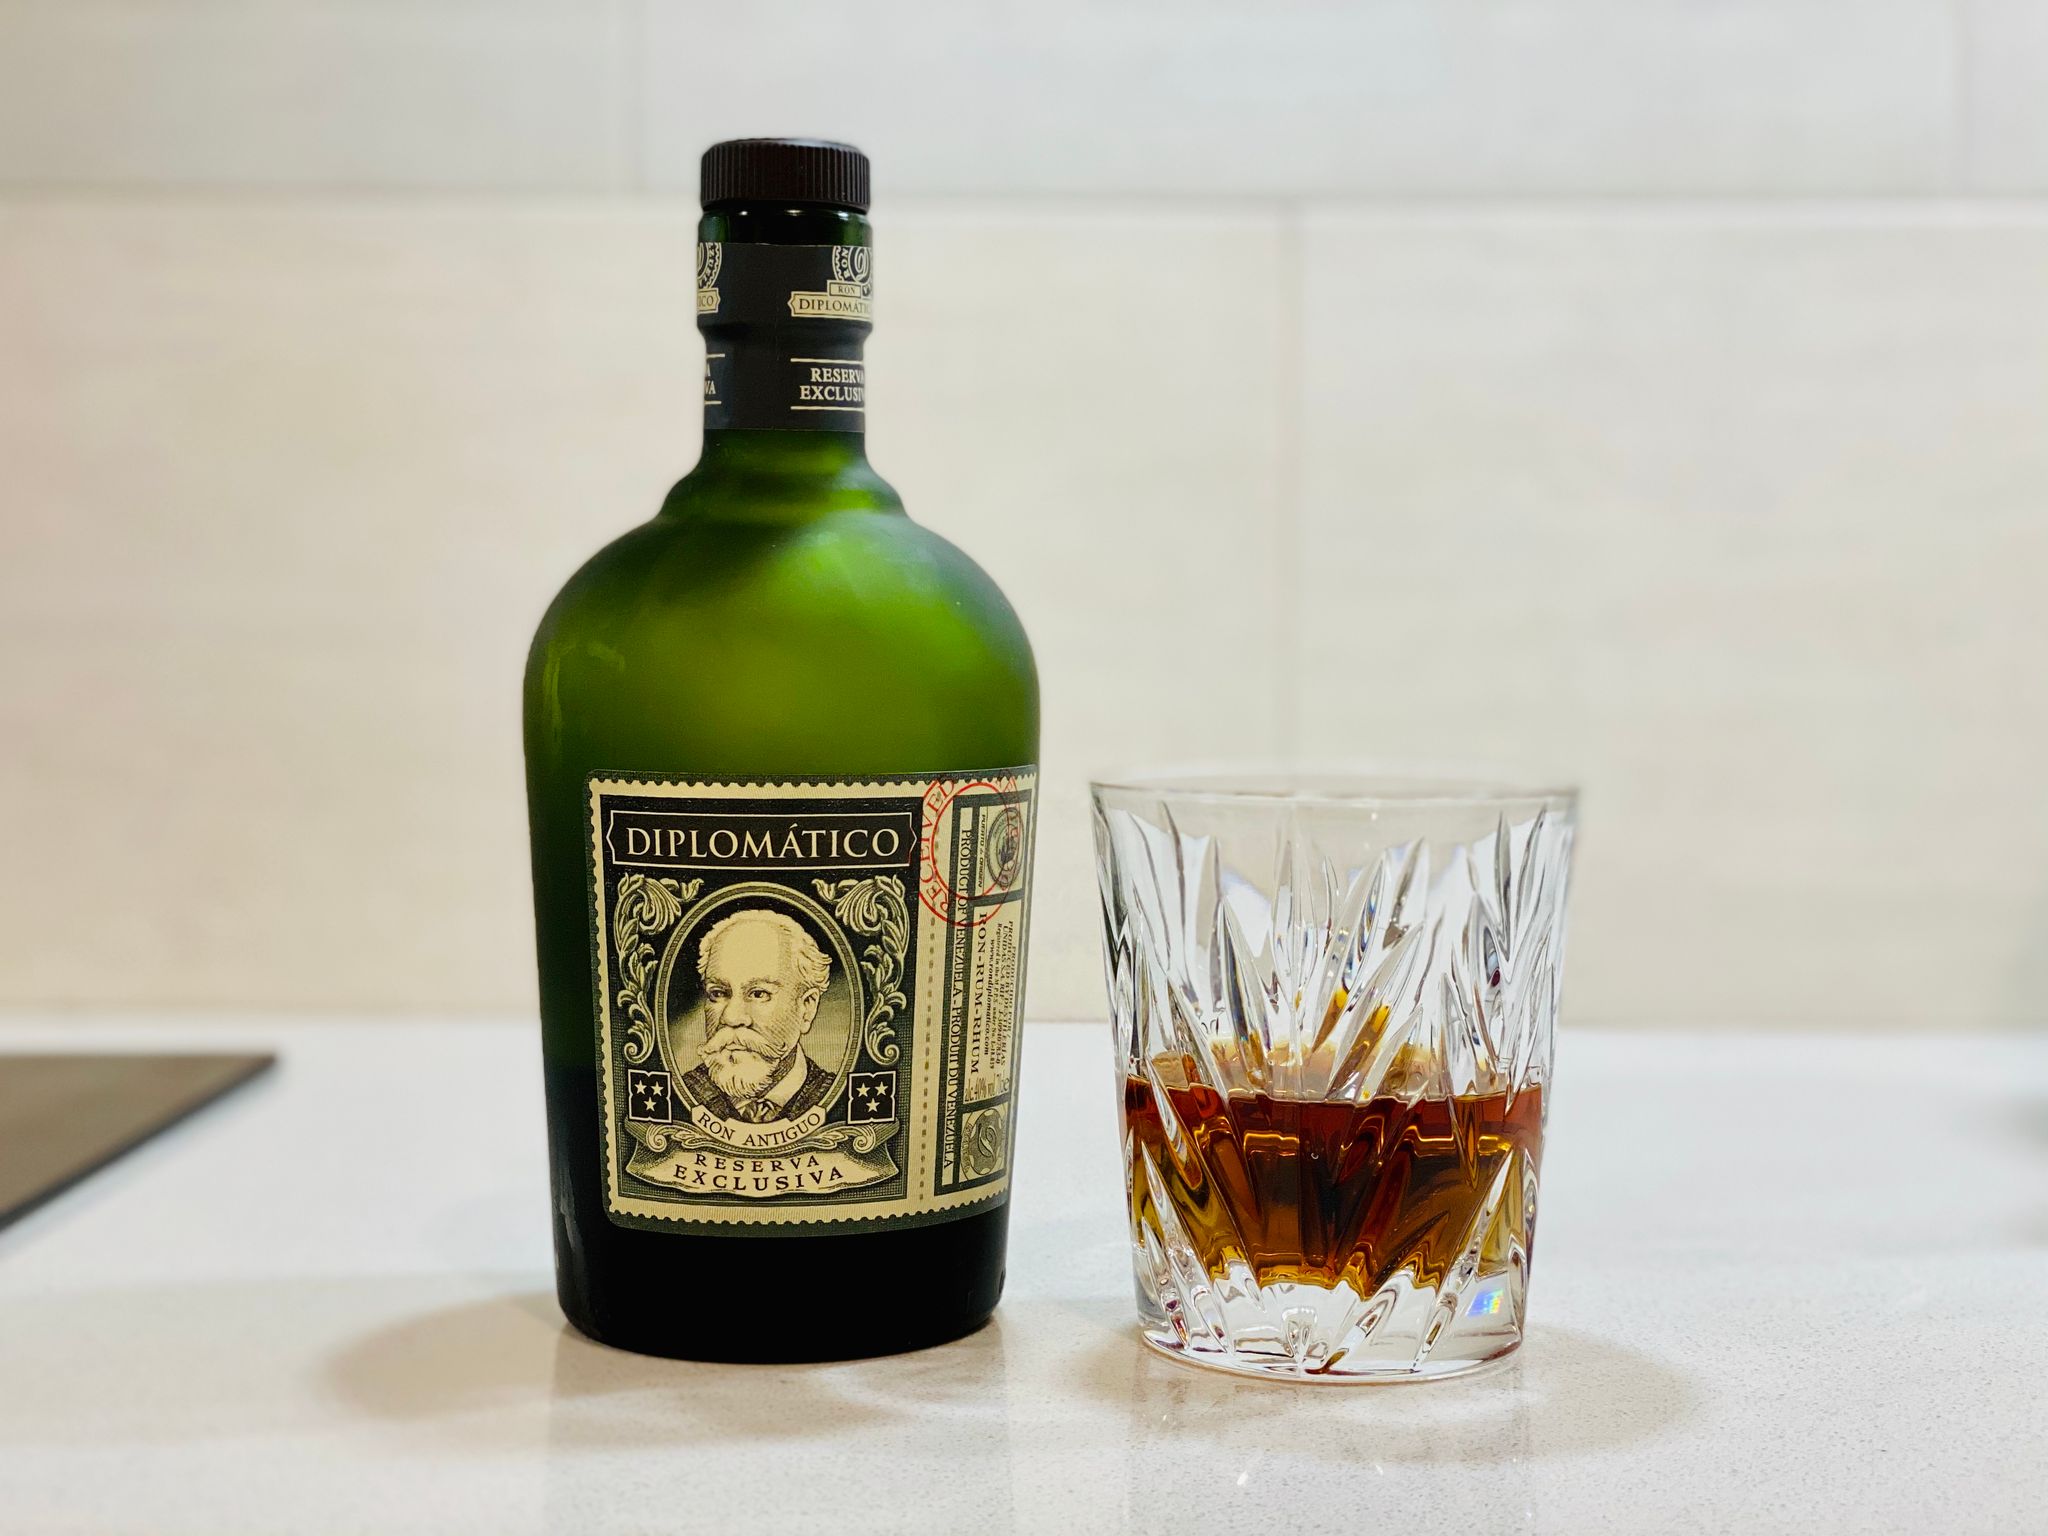 A photo of a bottle of Diplomatico rum next to a lead crystal glass with some of the rum in it.